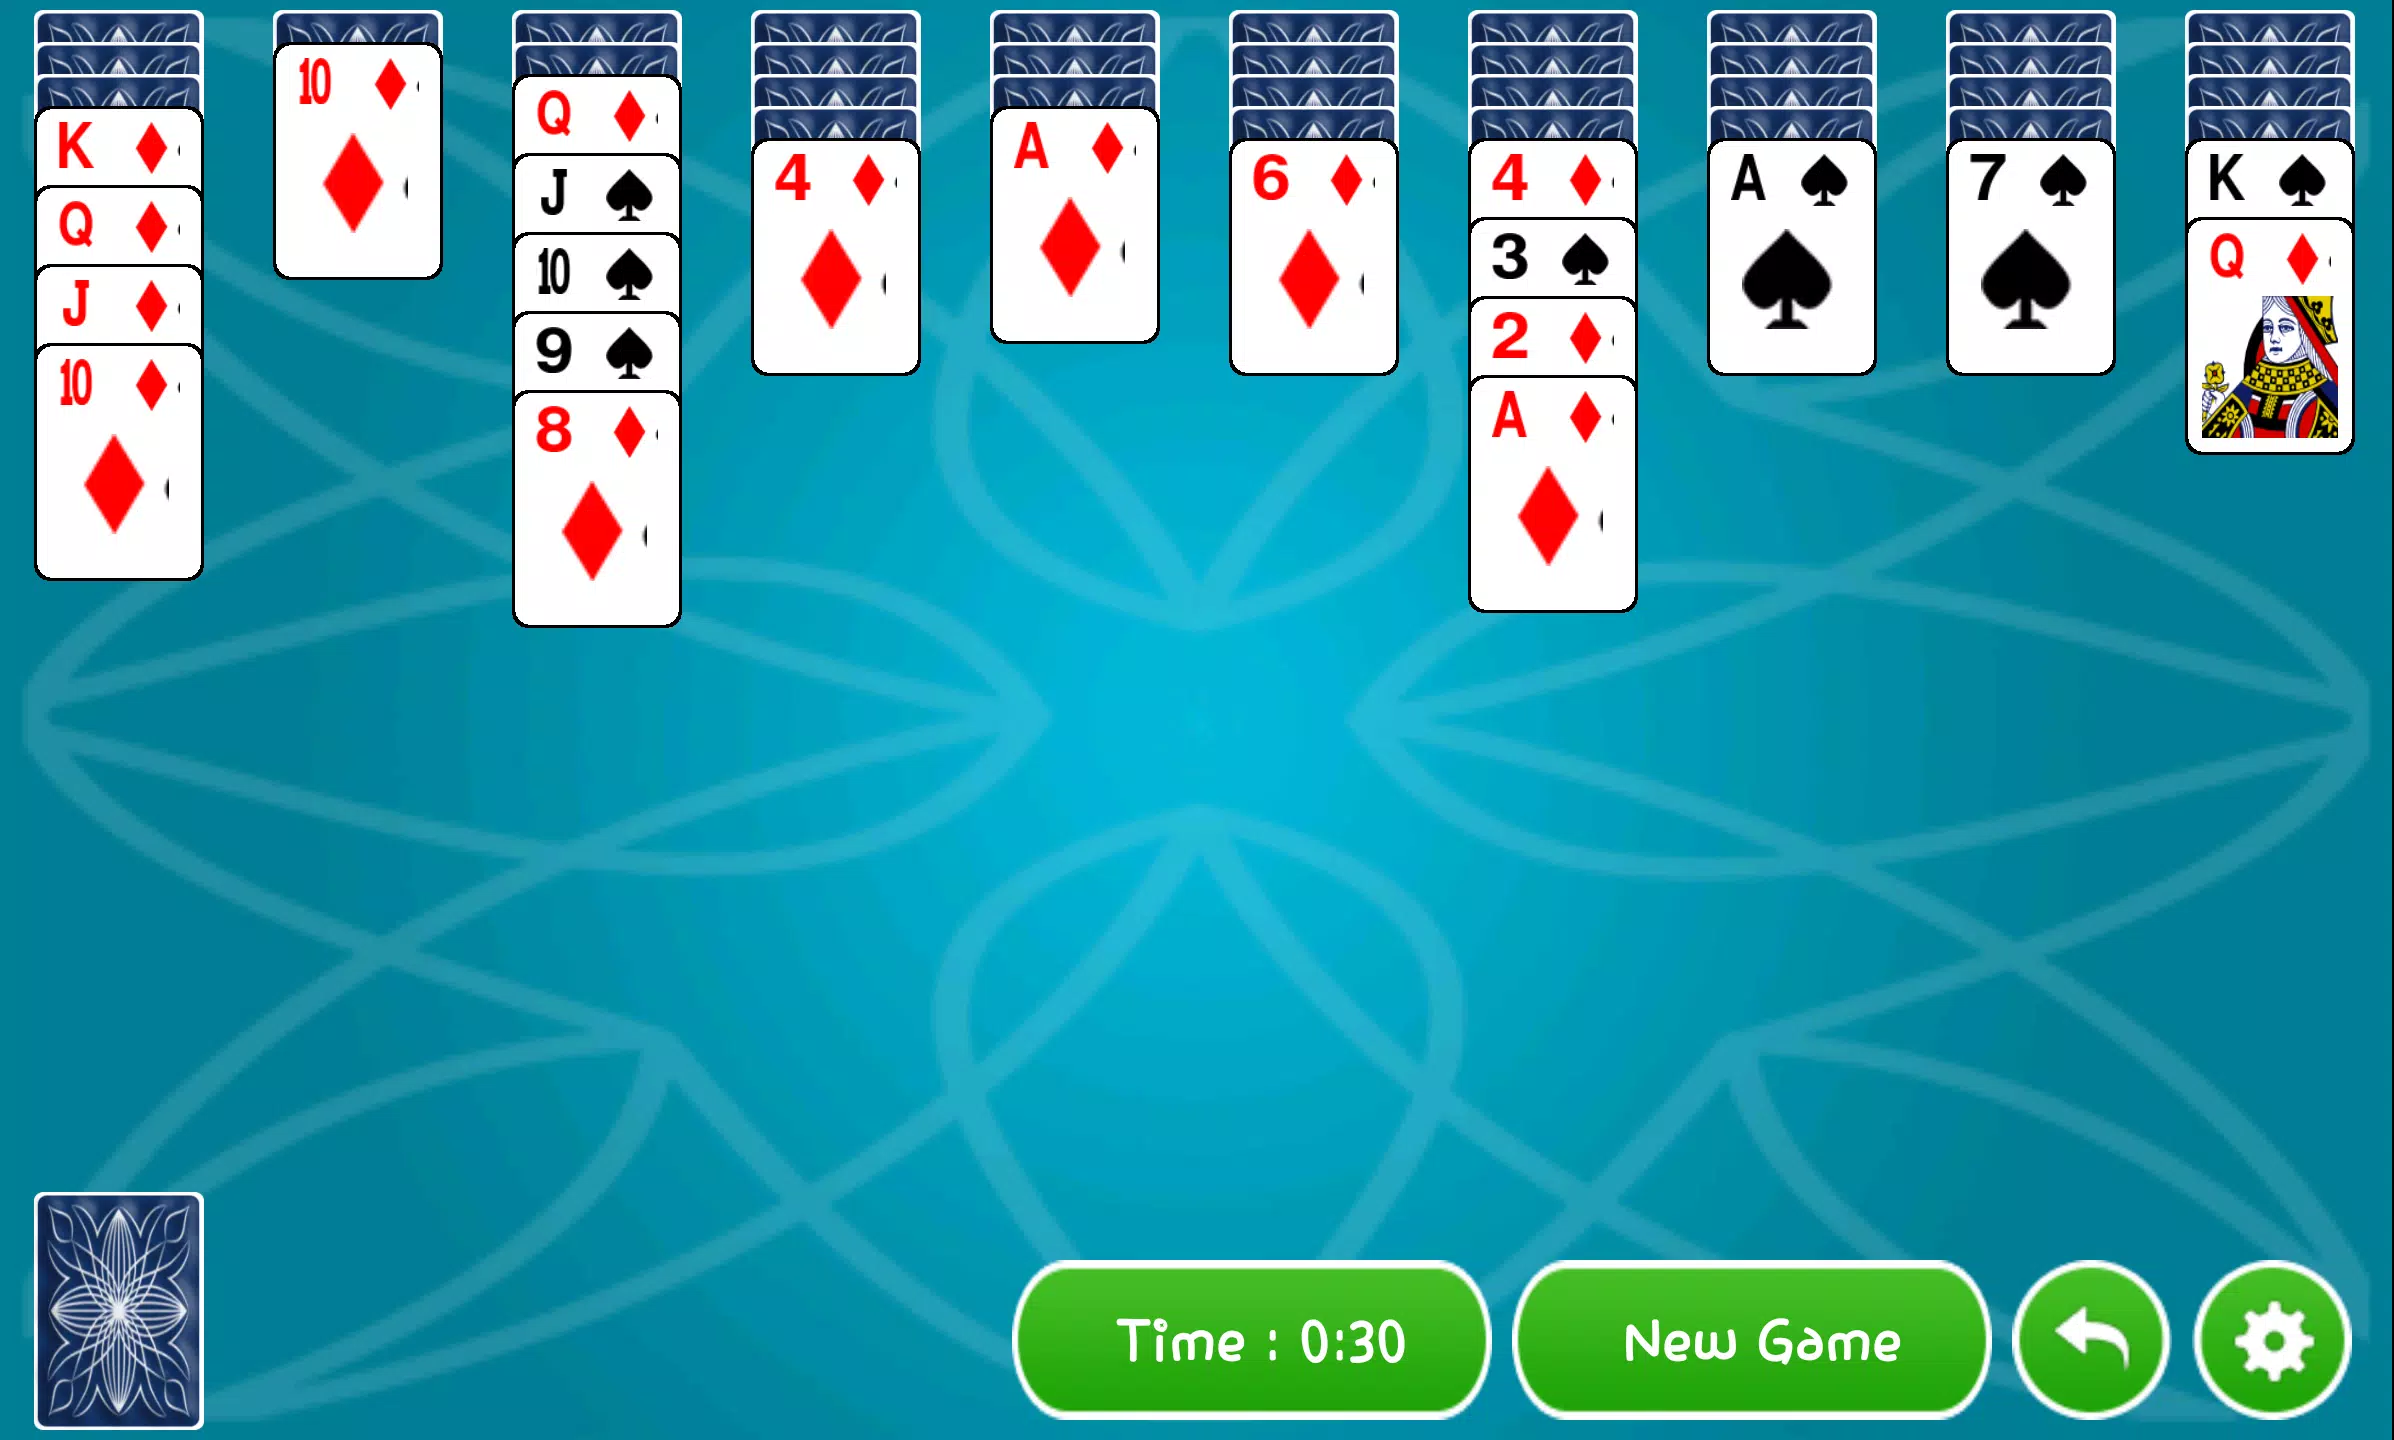 😍 Spider Solitaire online — Play Spider Solitaire for free